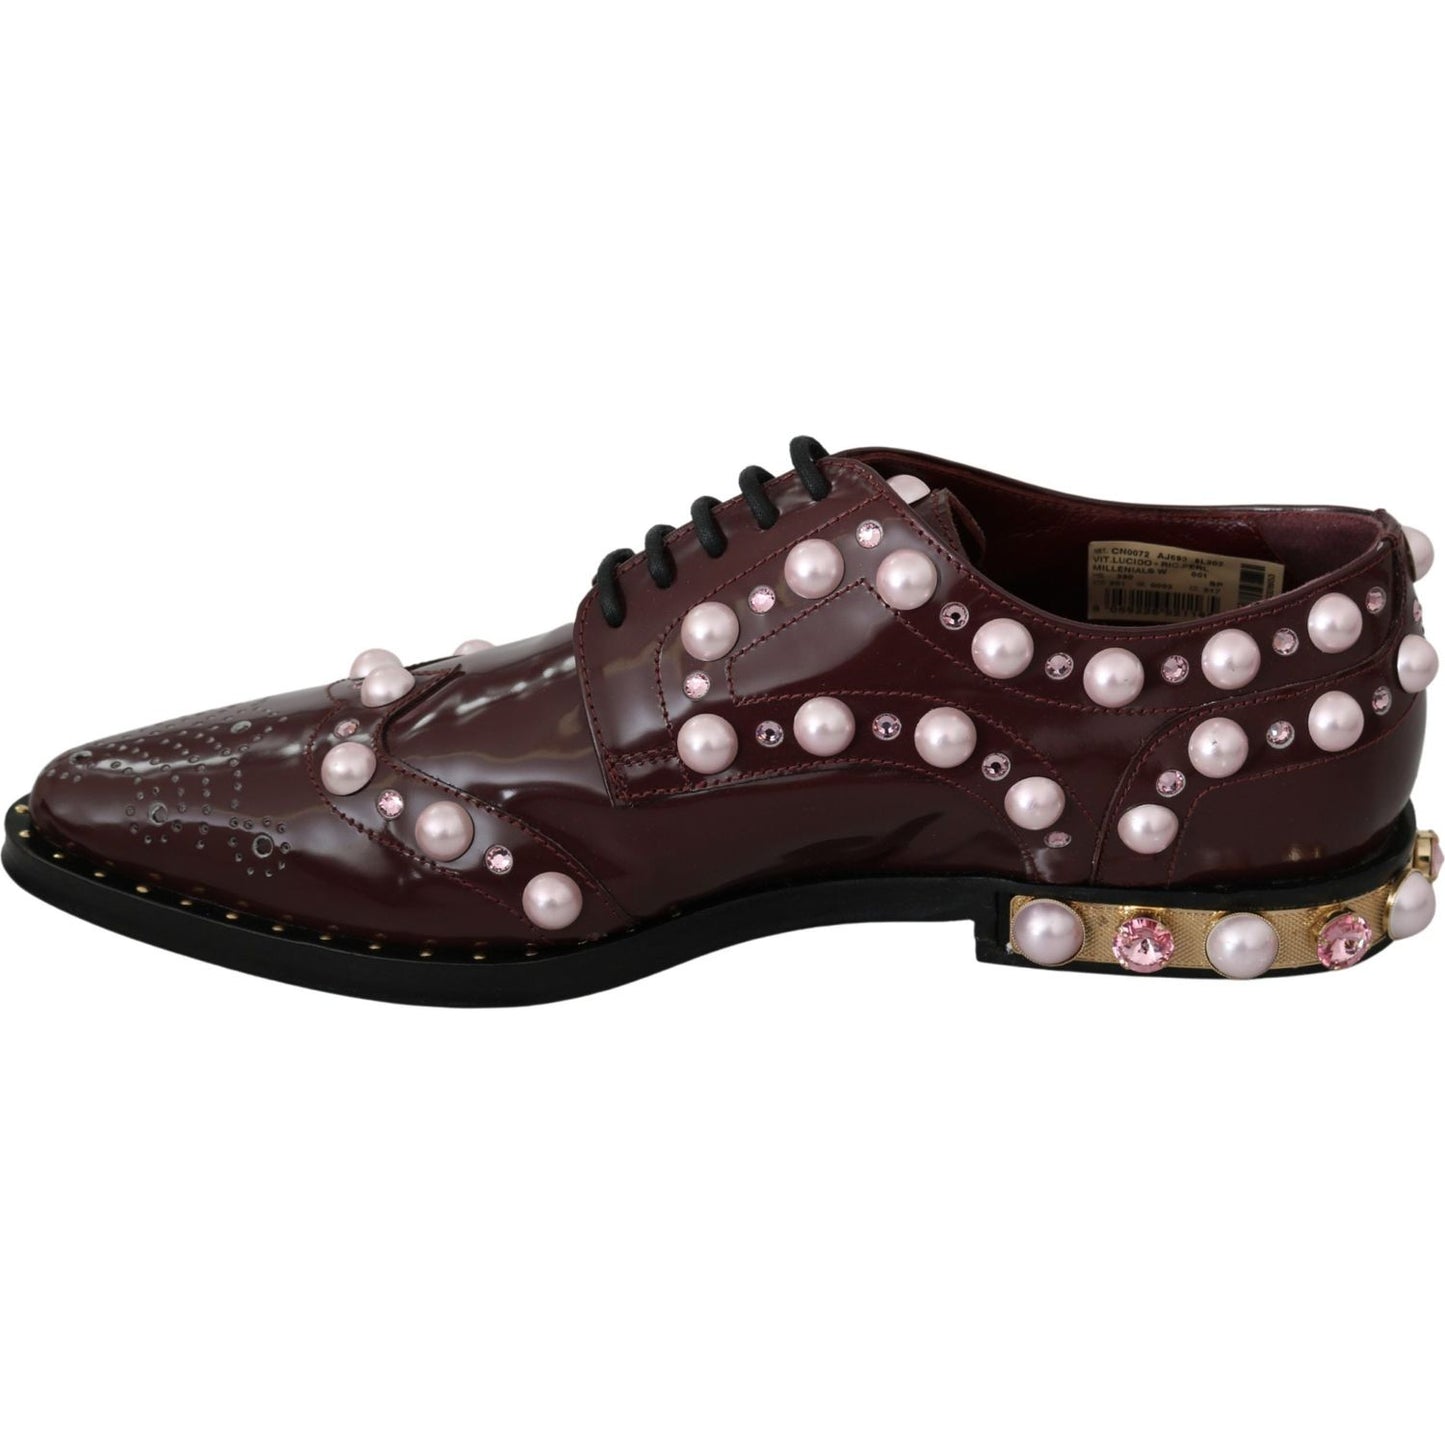 Dolce & Gabbana Elegant Bordeaux Lace-Up Flats with Pearls and Crystals bordeaux-leather-crystal-pearls-formal-shoes